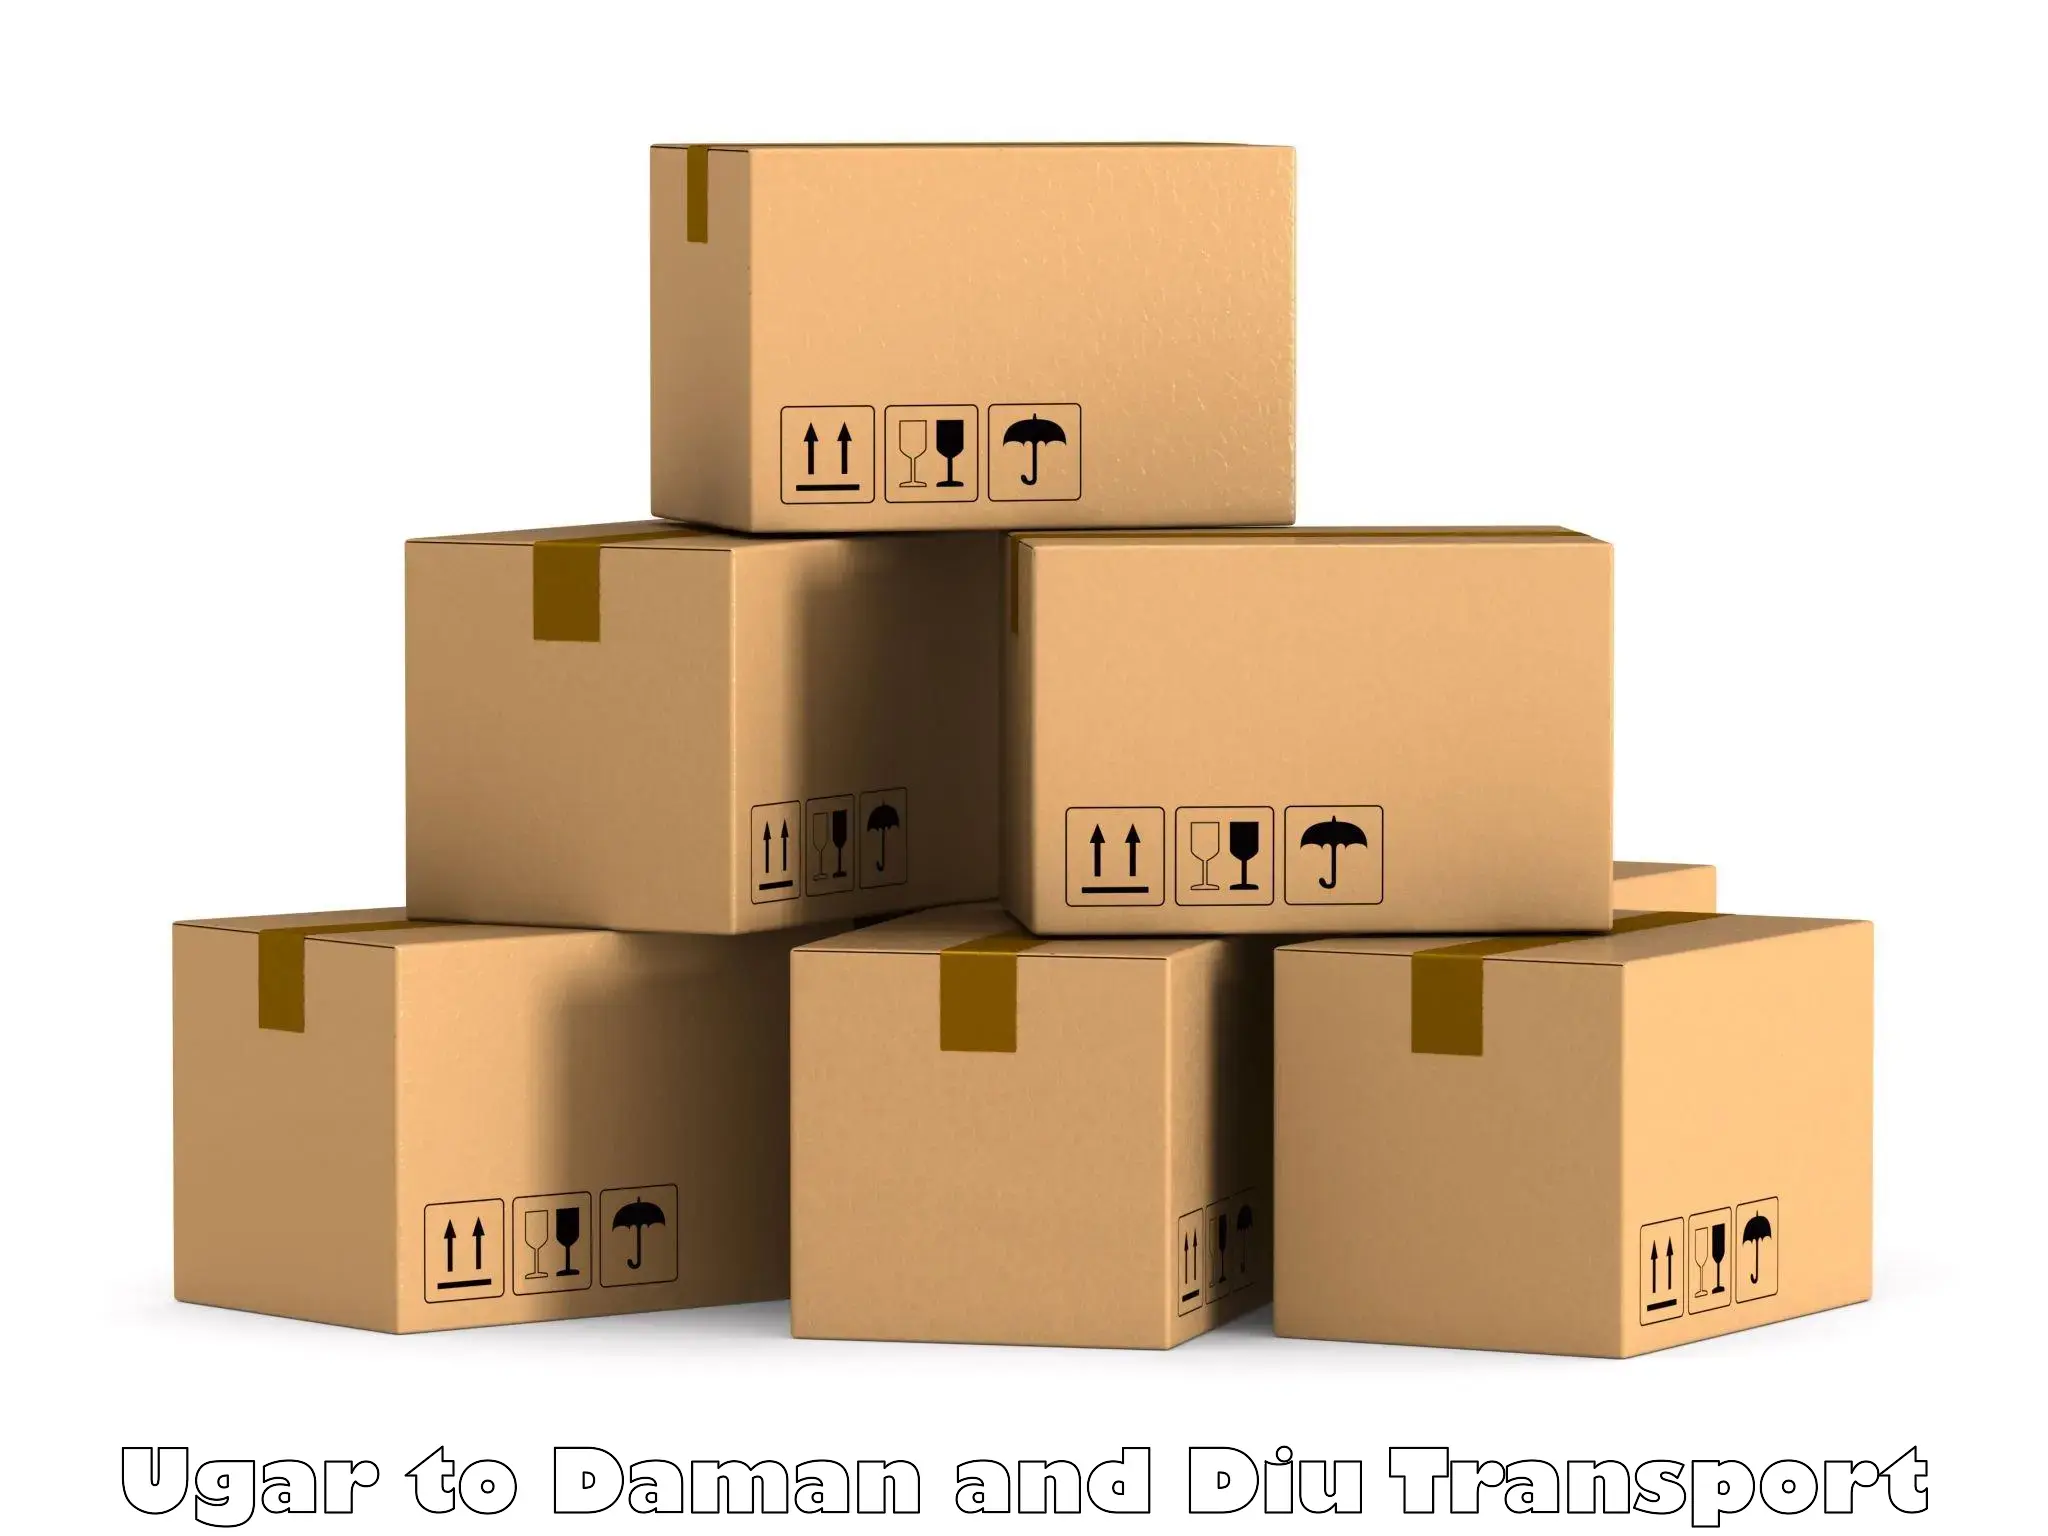 Commercial transport service Ugar to Daman and Diu